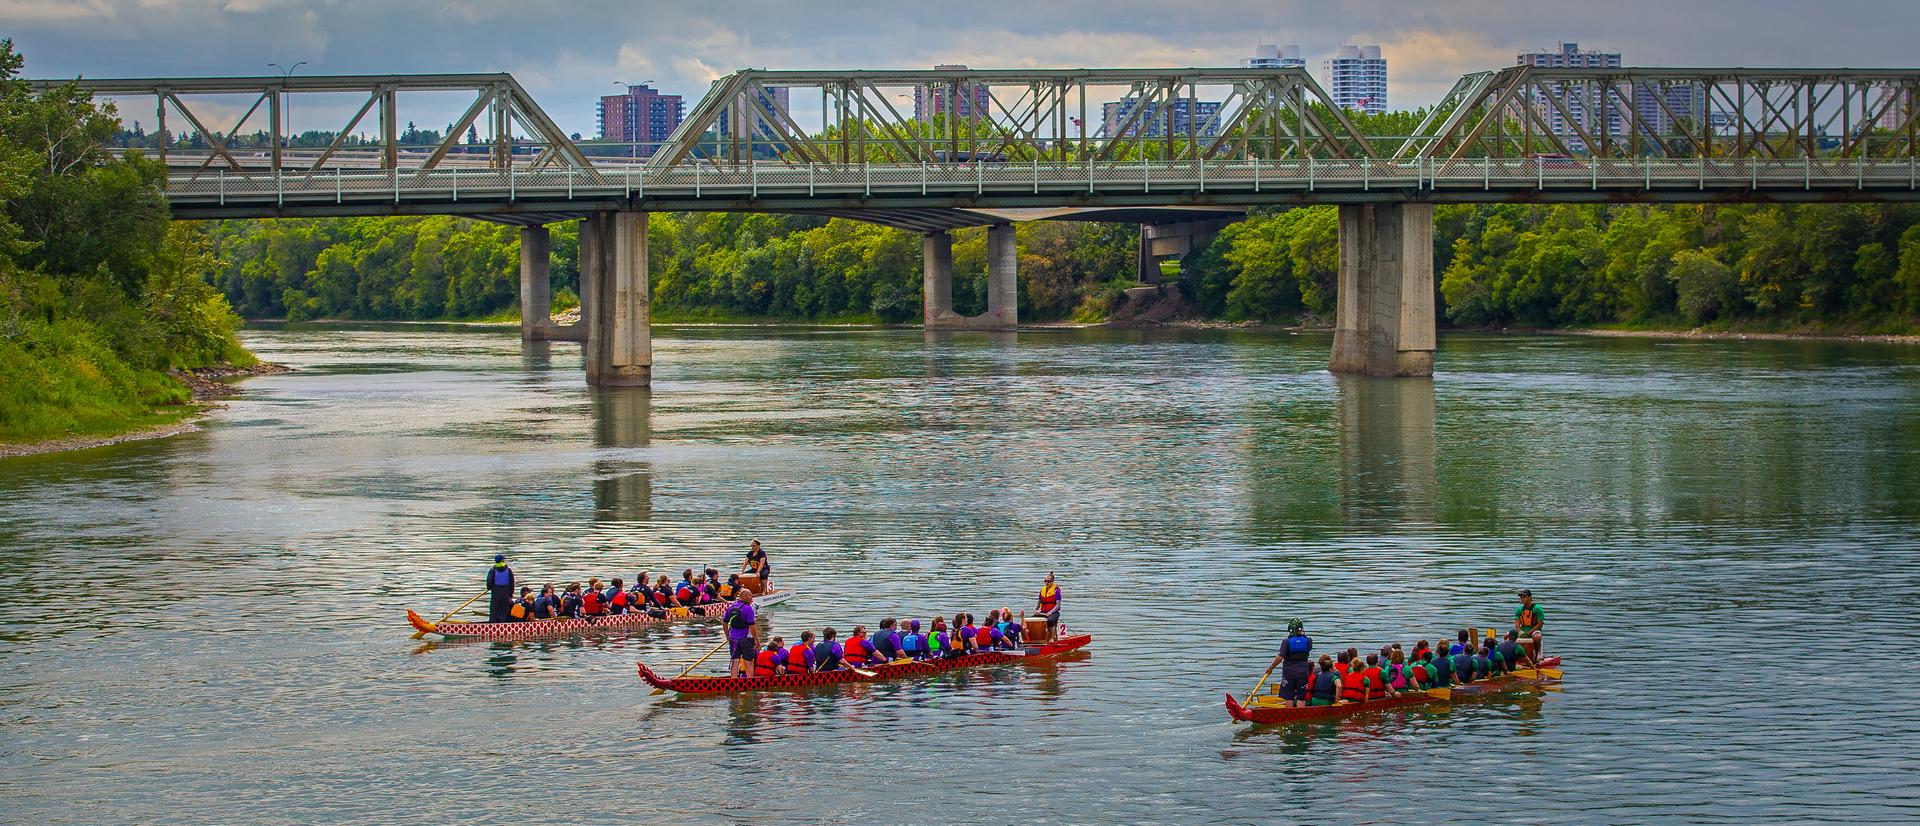 Dragon-boat team building in the River Valley